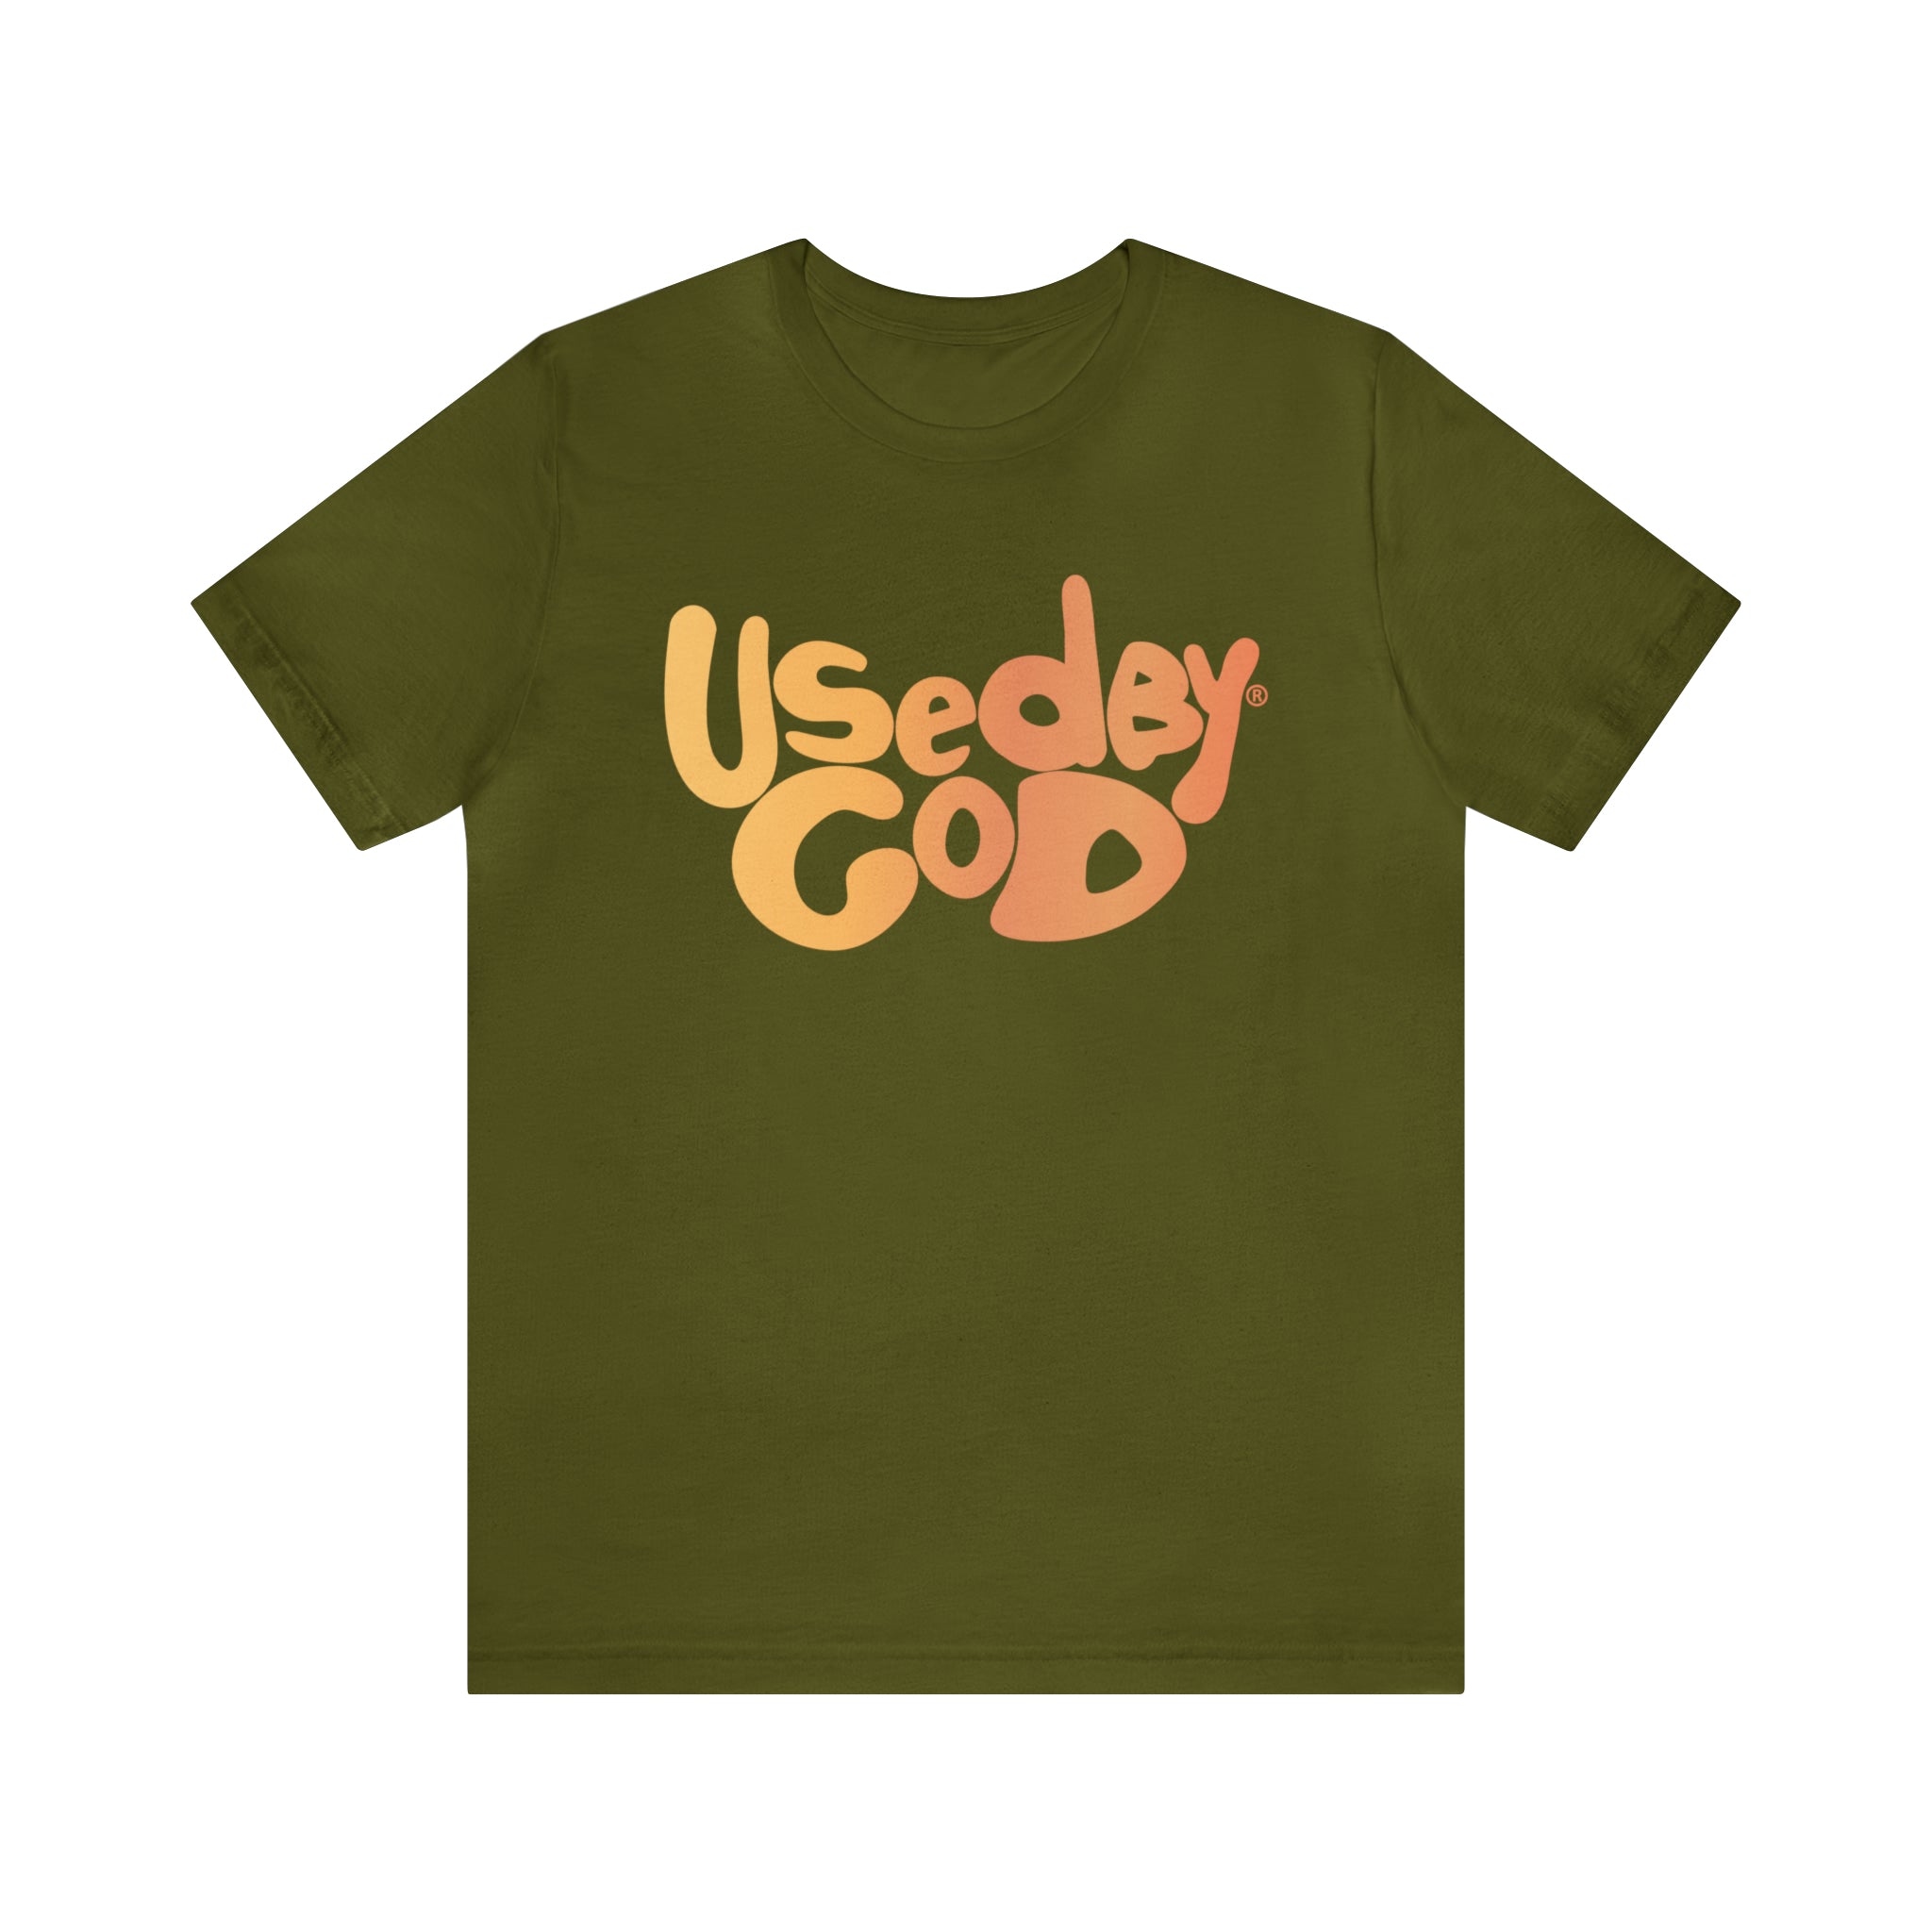 Used By God Retro Tee, Used By God, Used By God Clothing, Christian Apparel, Christian T-Shirts, Christian Shirts, christian t shirts for women, Men's Christian T-Shirt, Christian Clothing, God Shirts, christian clothing t shirts, Christian Sweatshirts, womens christian t shirts, t-shirts about jesus, God Clothing, Jesus Hoodie, Jesus Clothes, God Is Dope, Art Of Homage, Red Letter Clothing, Elevated Faith, Beacon Threads, God The Father Apparel